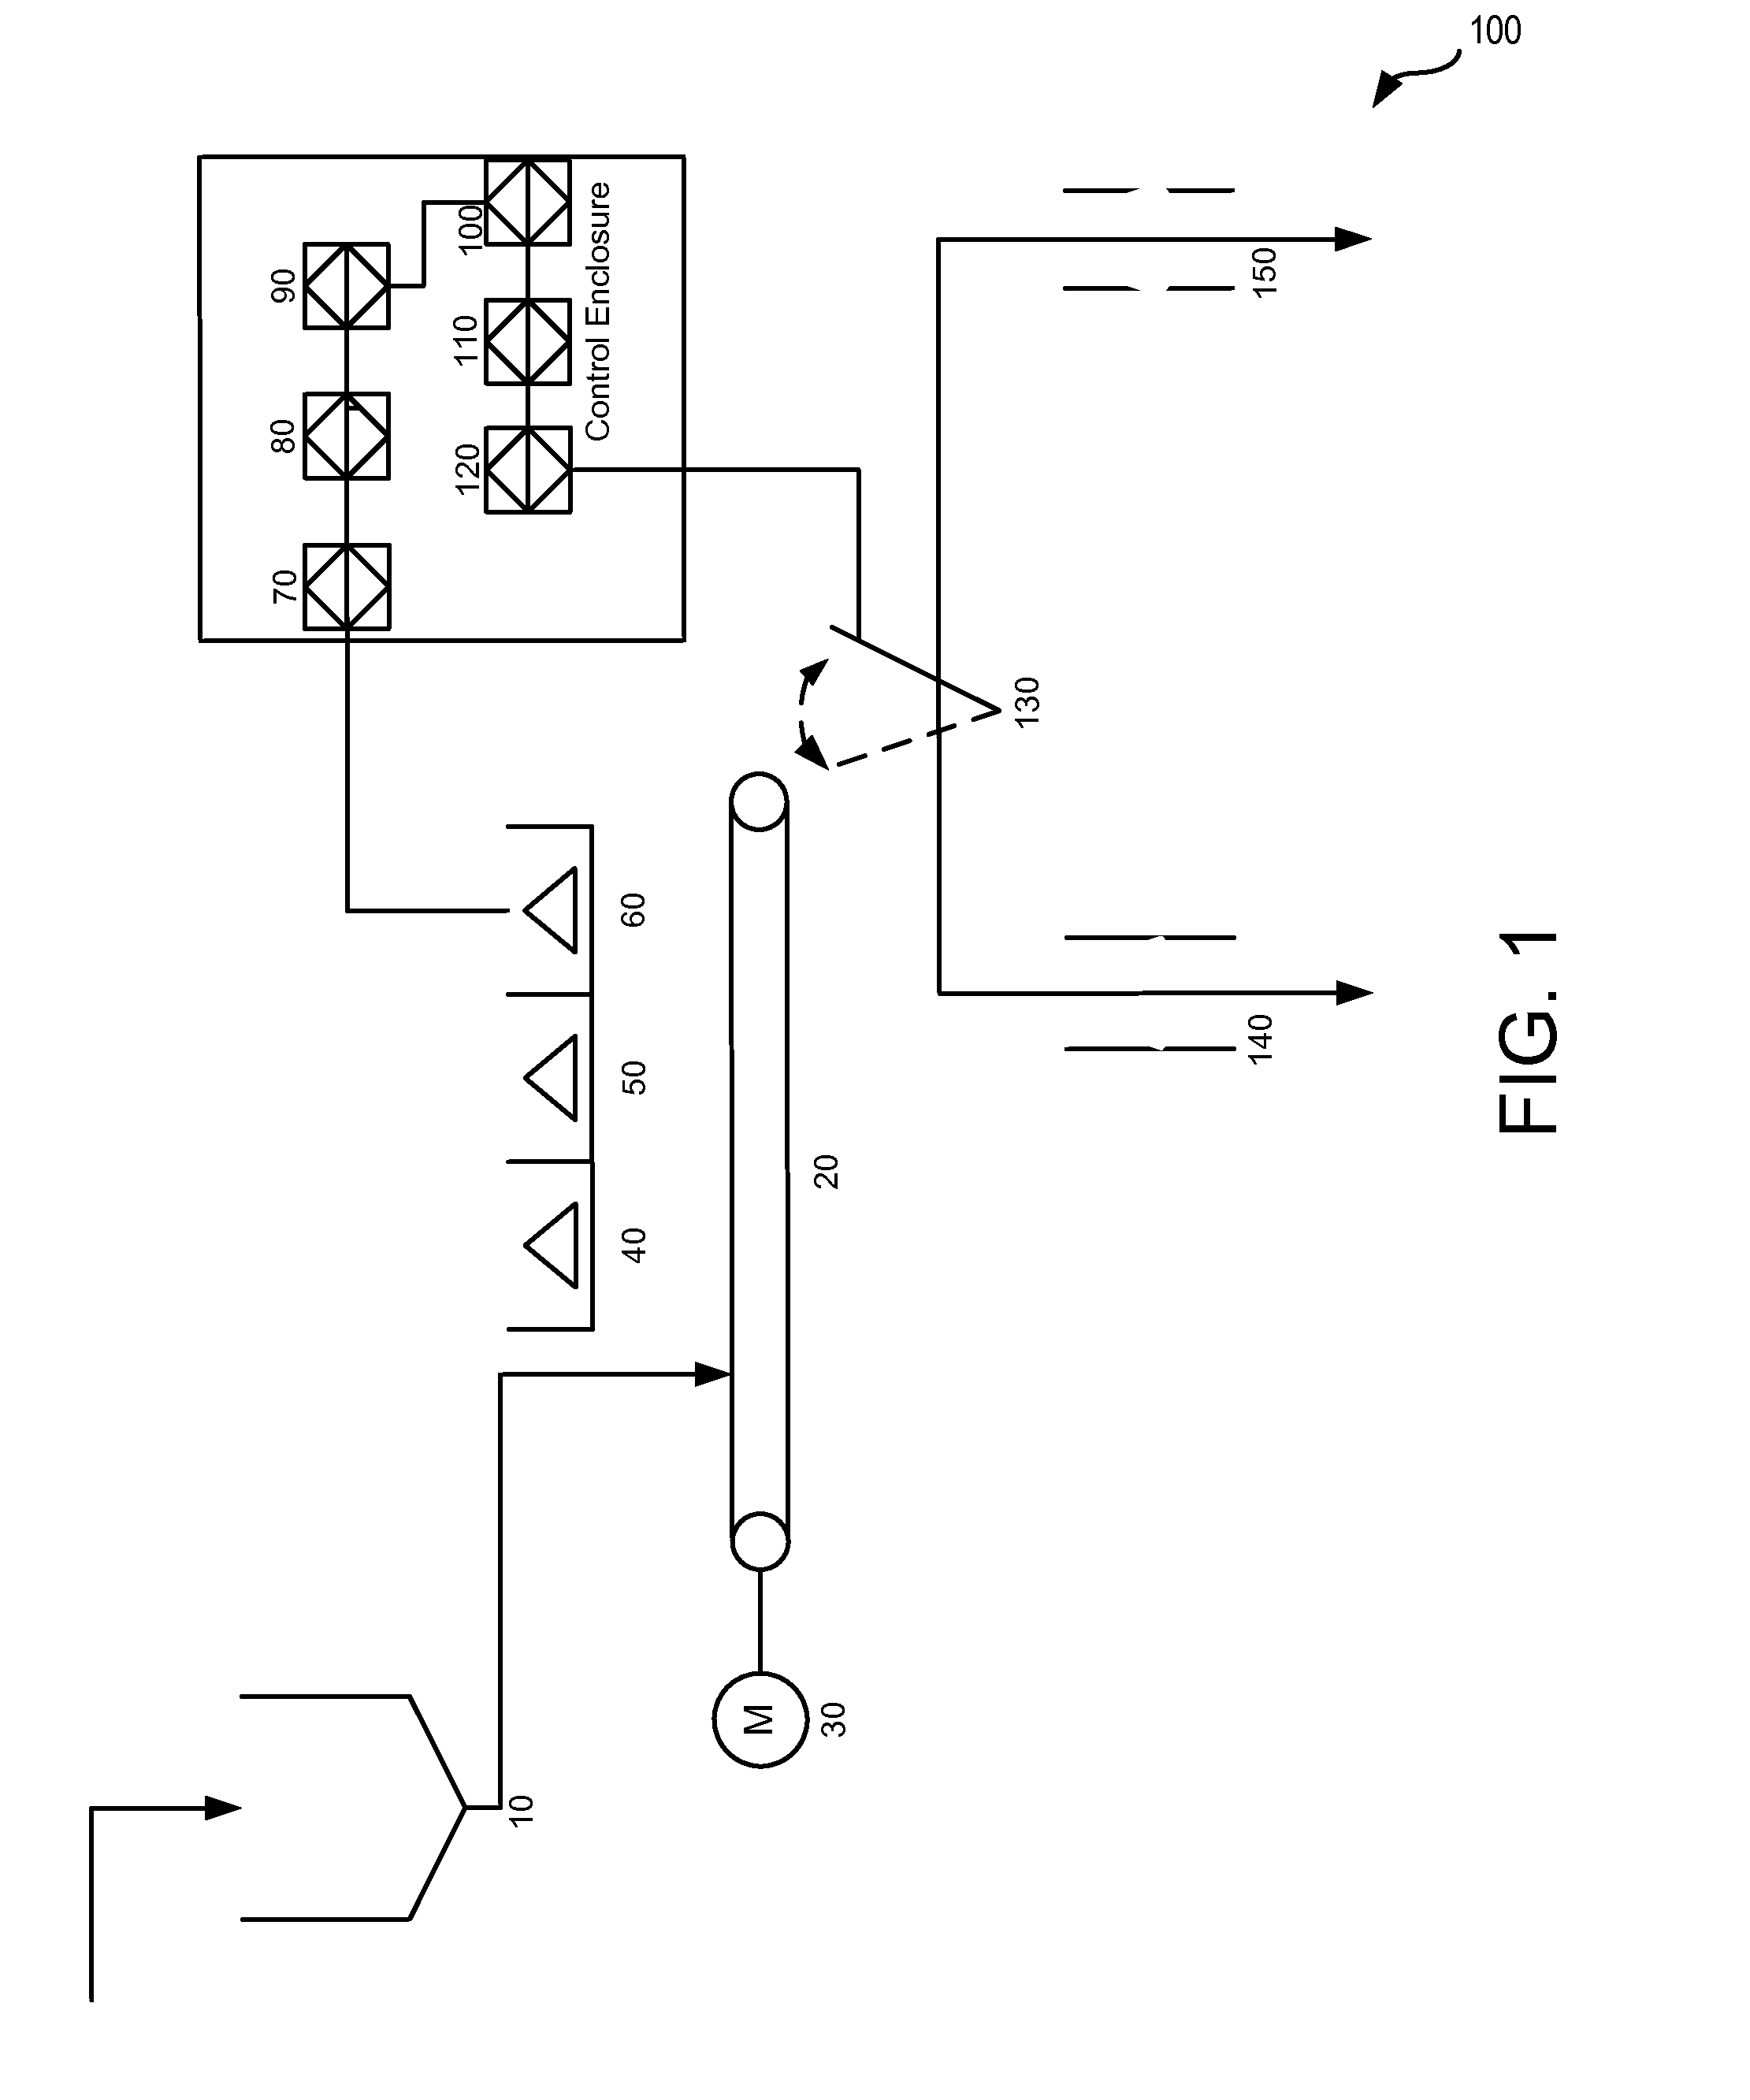 Sorting materials using pattern recognition, such as upgrading nickel laterite ores through electromagnetic sensor-based methods